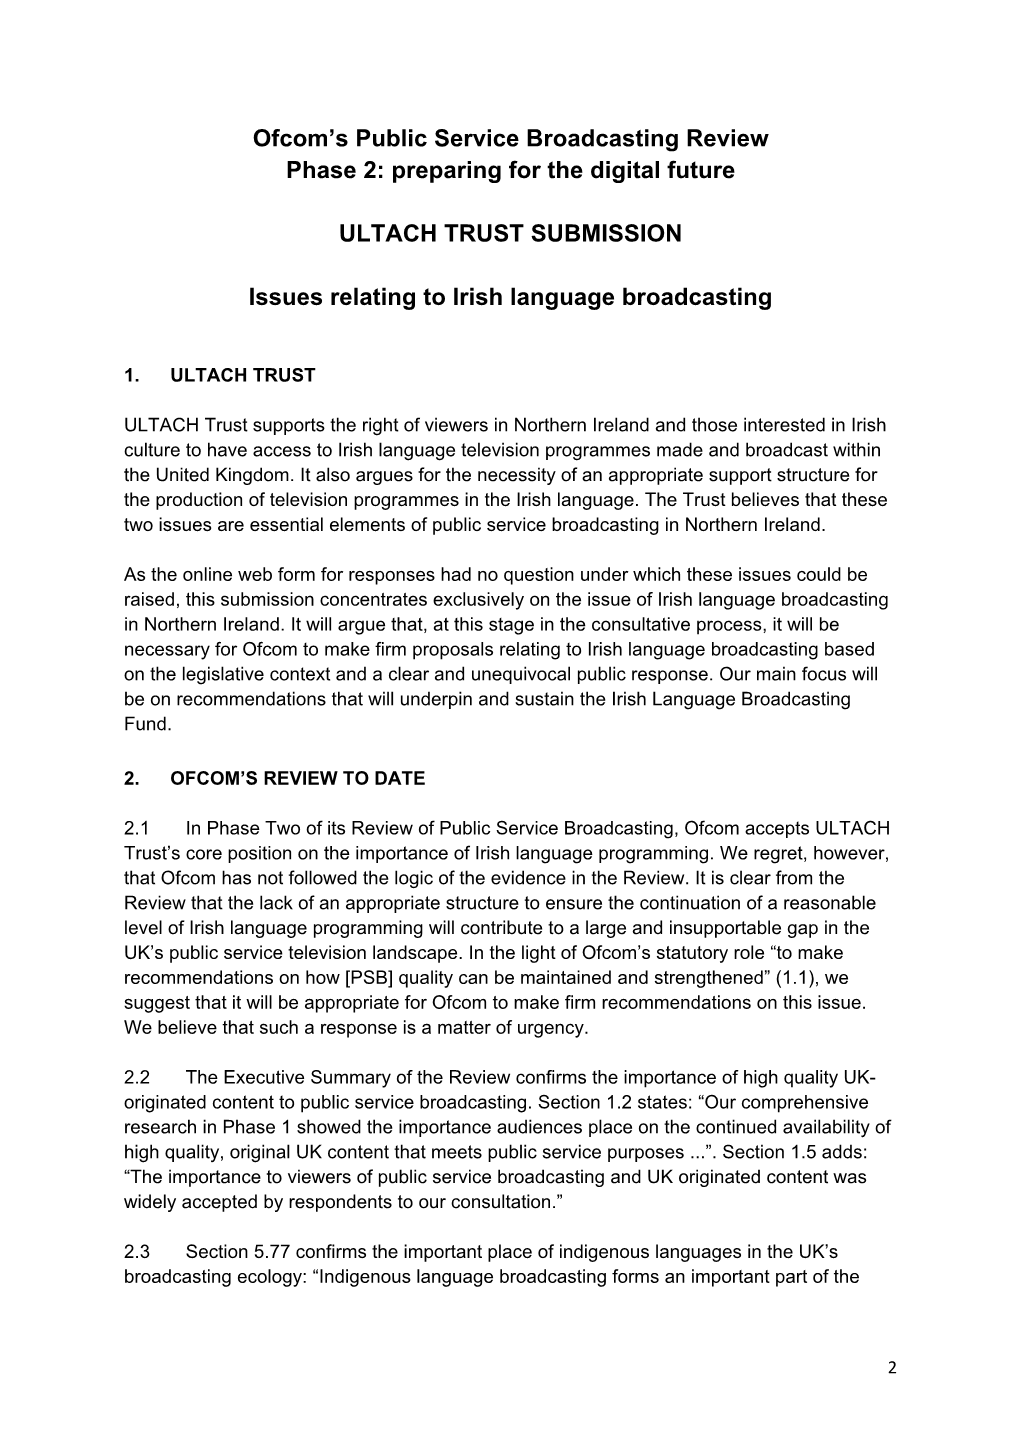 Ofcom's Public Service Broadcasting Review Phase 2: Preparing for the Digital Future ULTACH TRUST SUBMISSION Issues Relating T